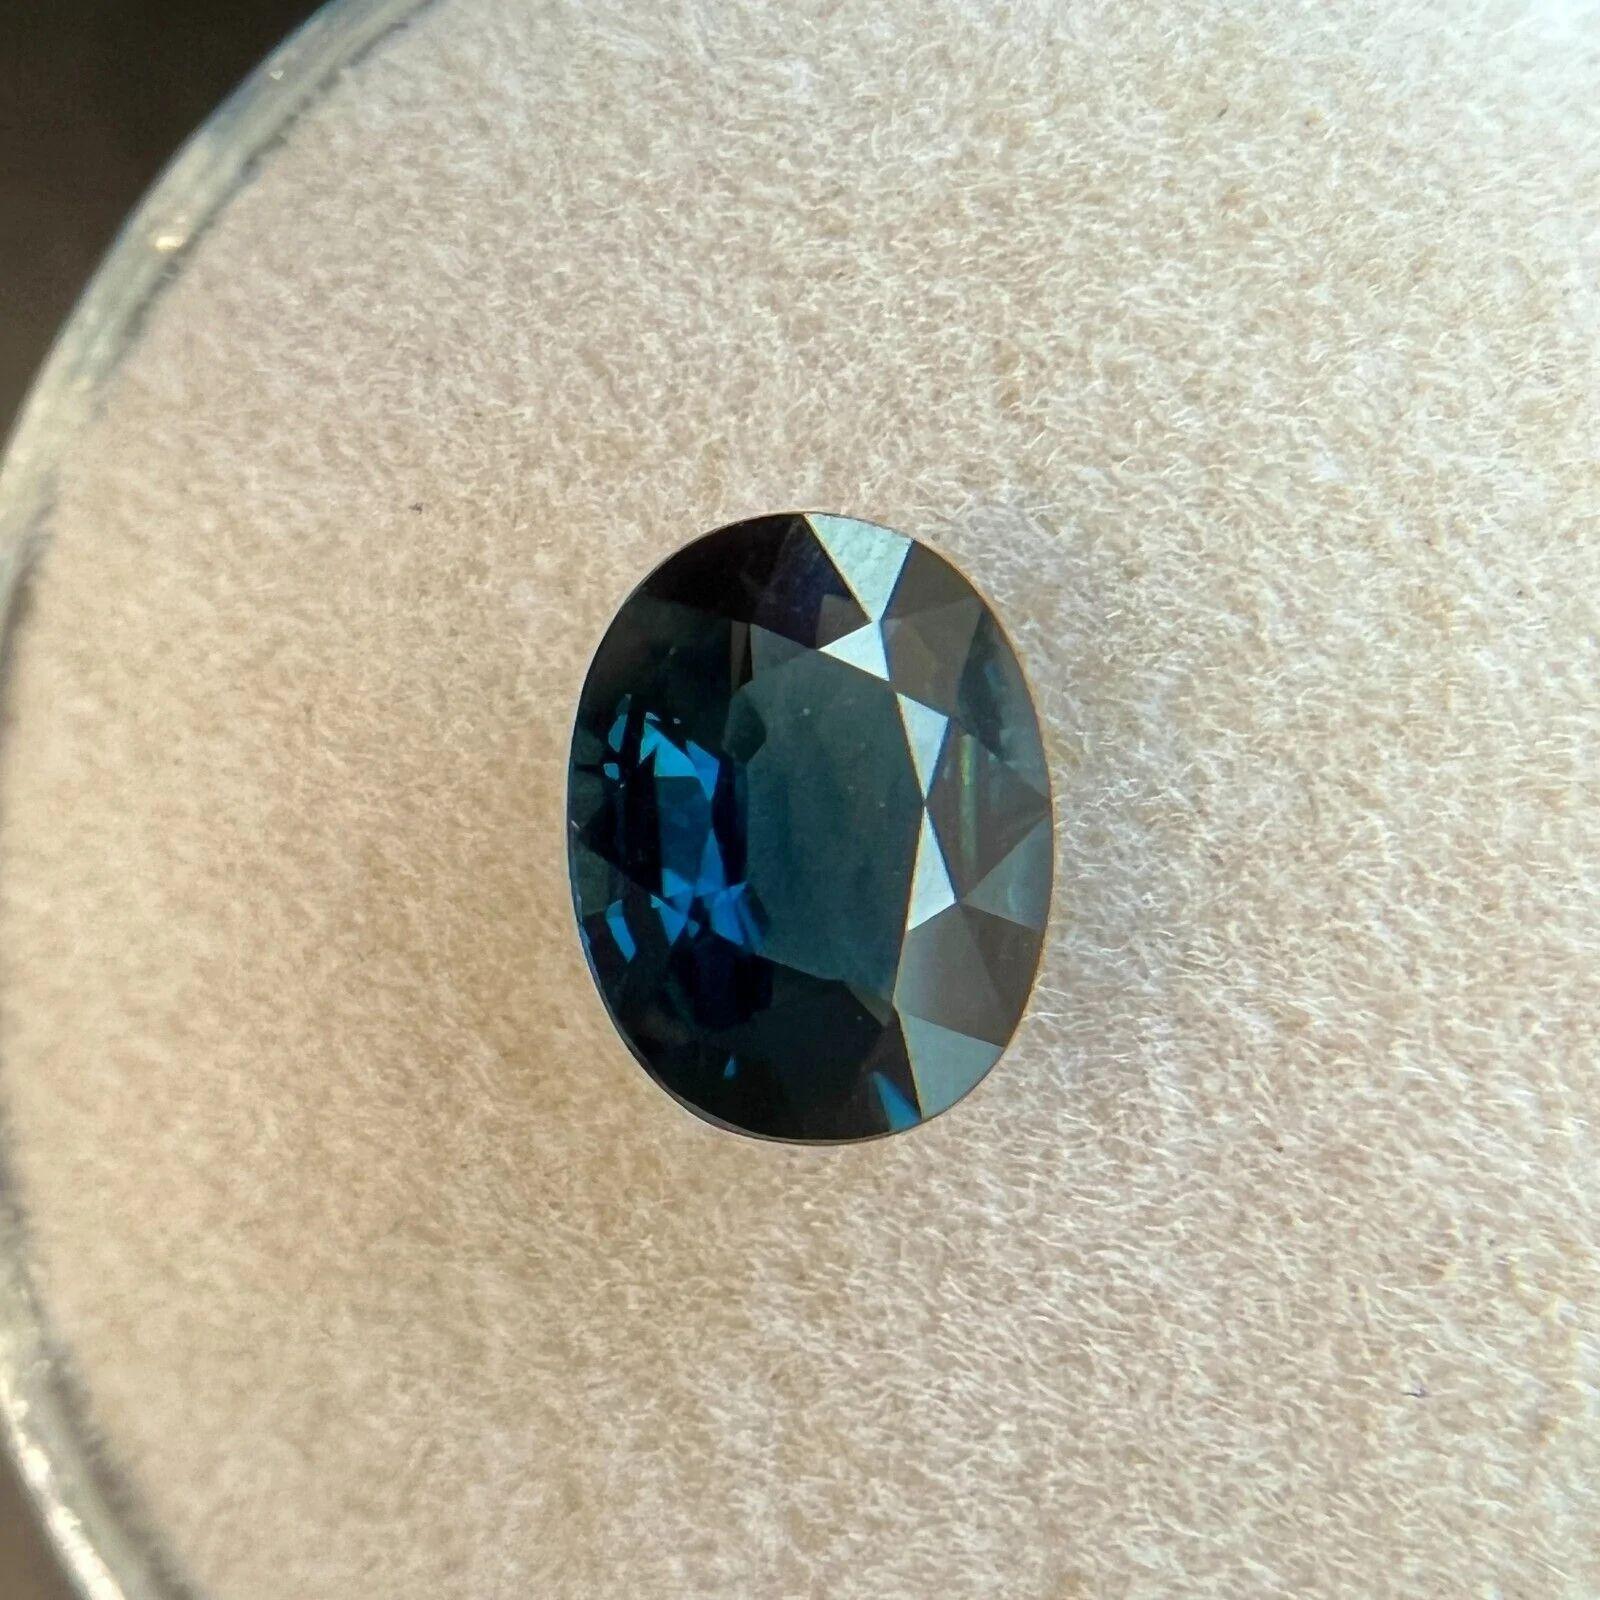 Women's or Men's 1.26ct Deep Blue Sapphire Oval Cut Rare 7.6x5.8mm Loose Gemstone VS For Sale